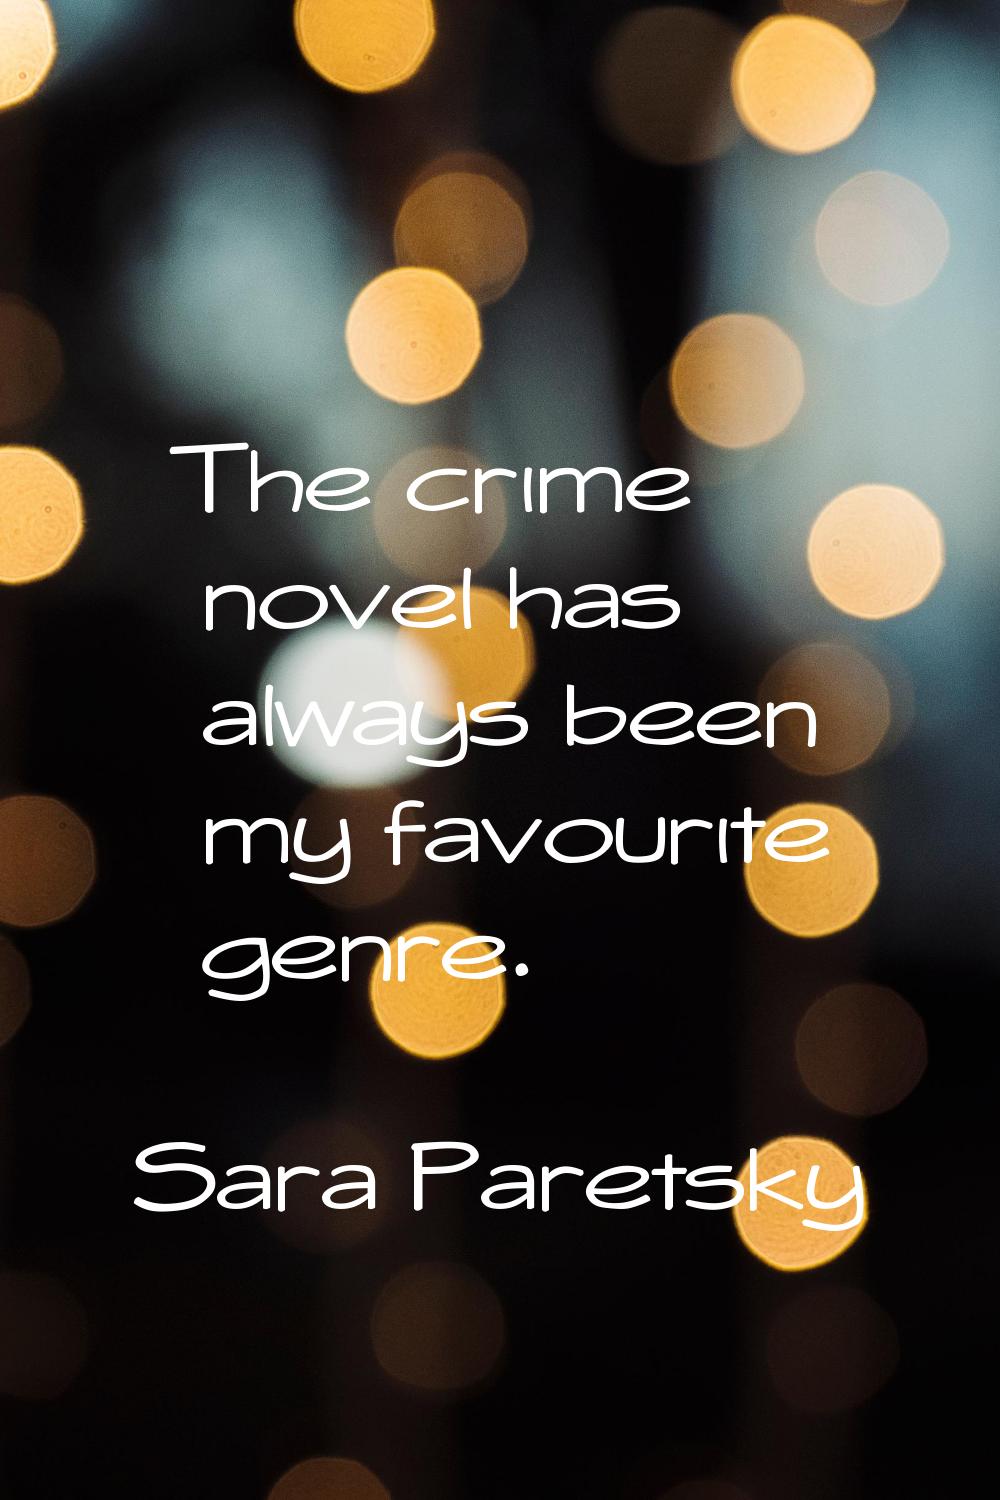 The crime novel has always been my favourite genre.